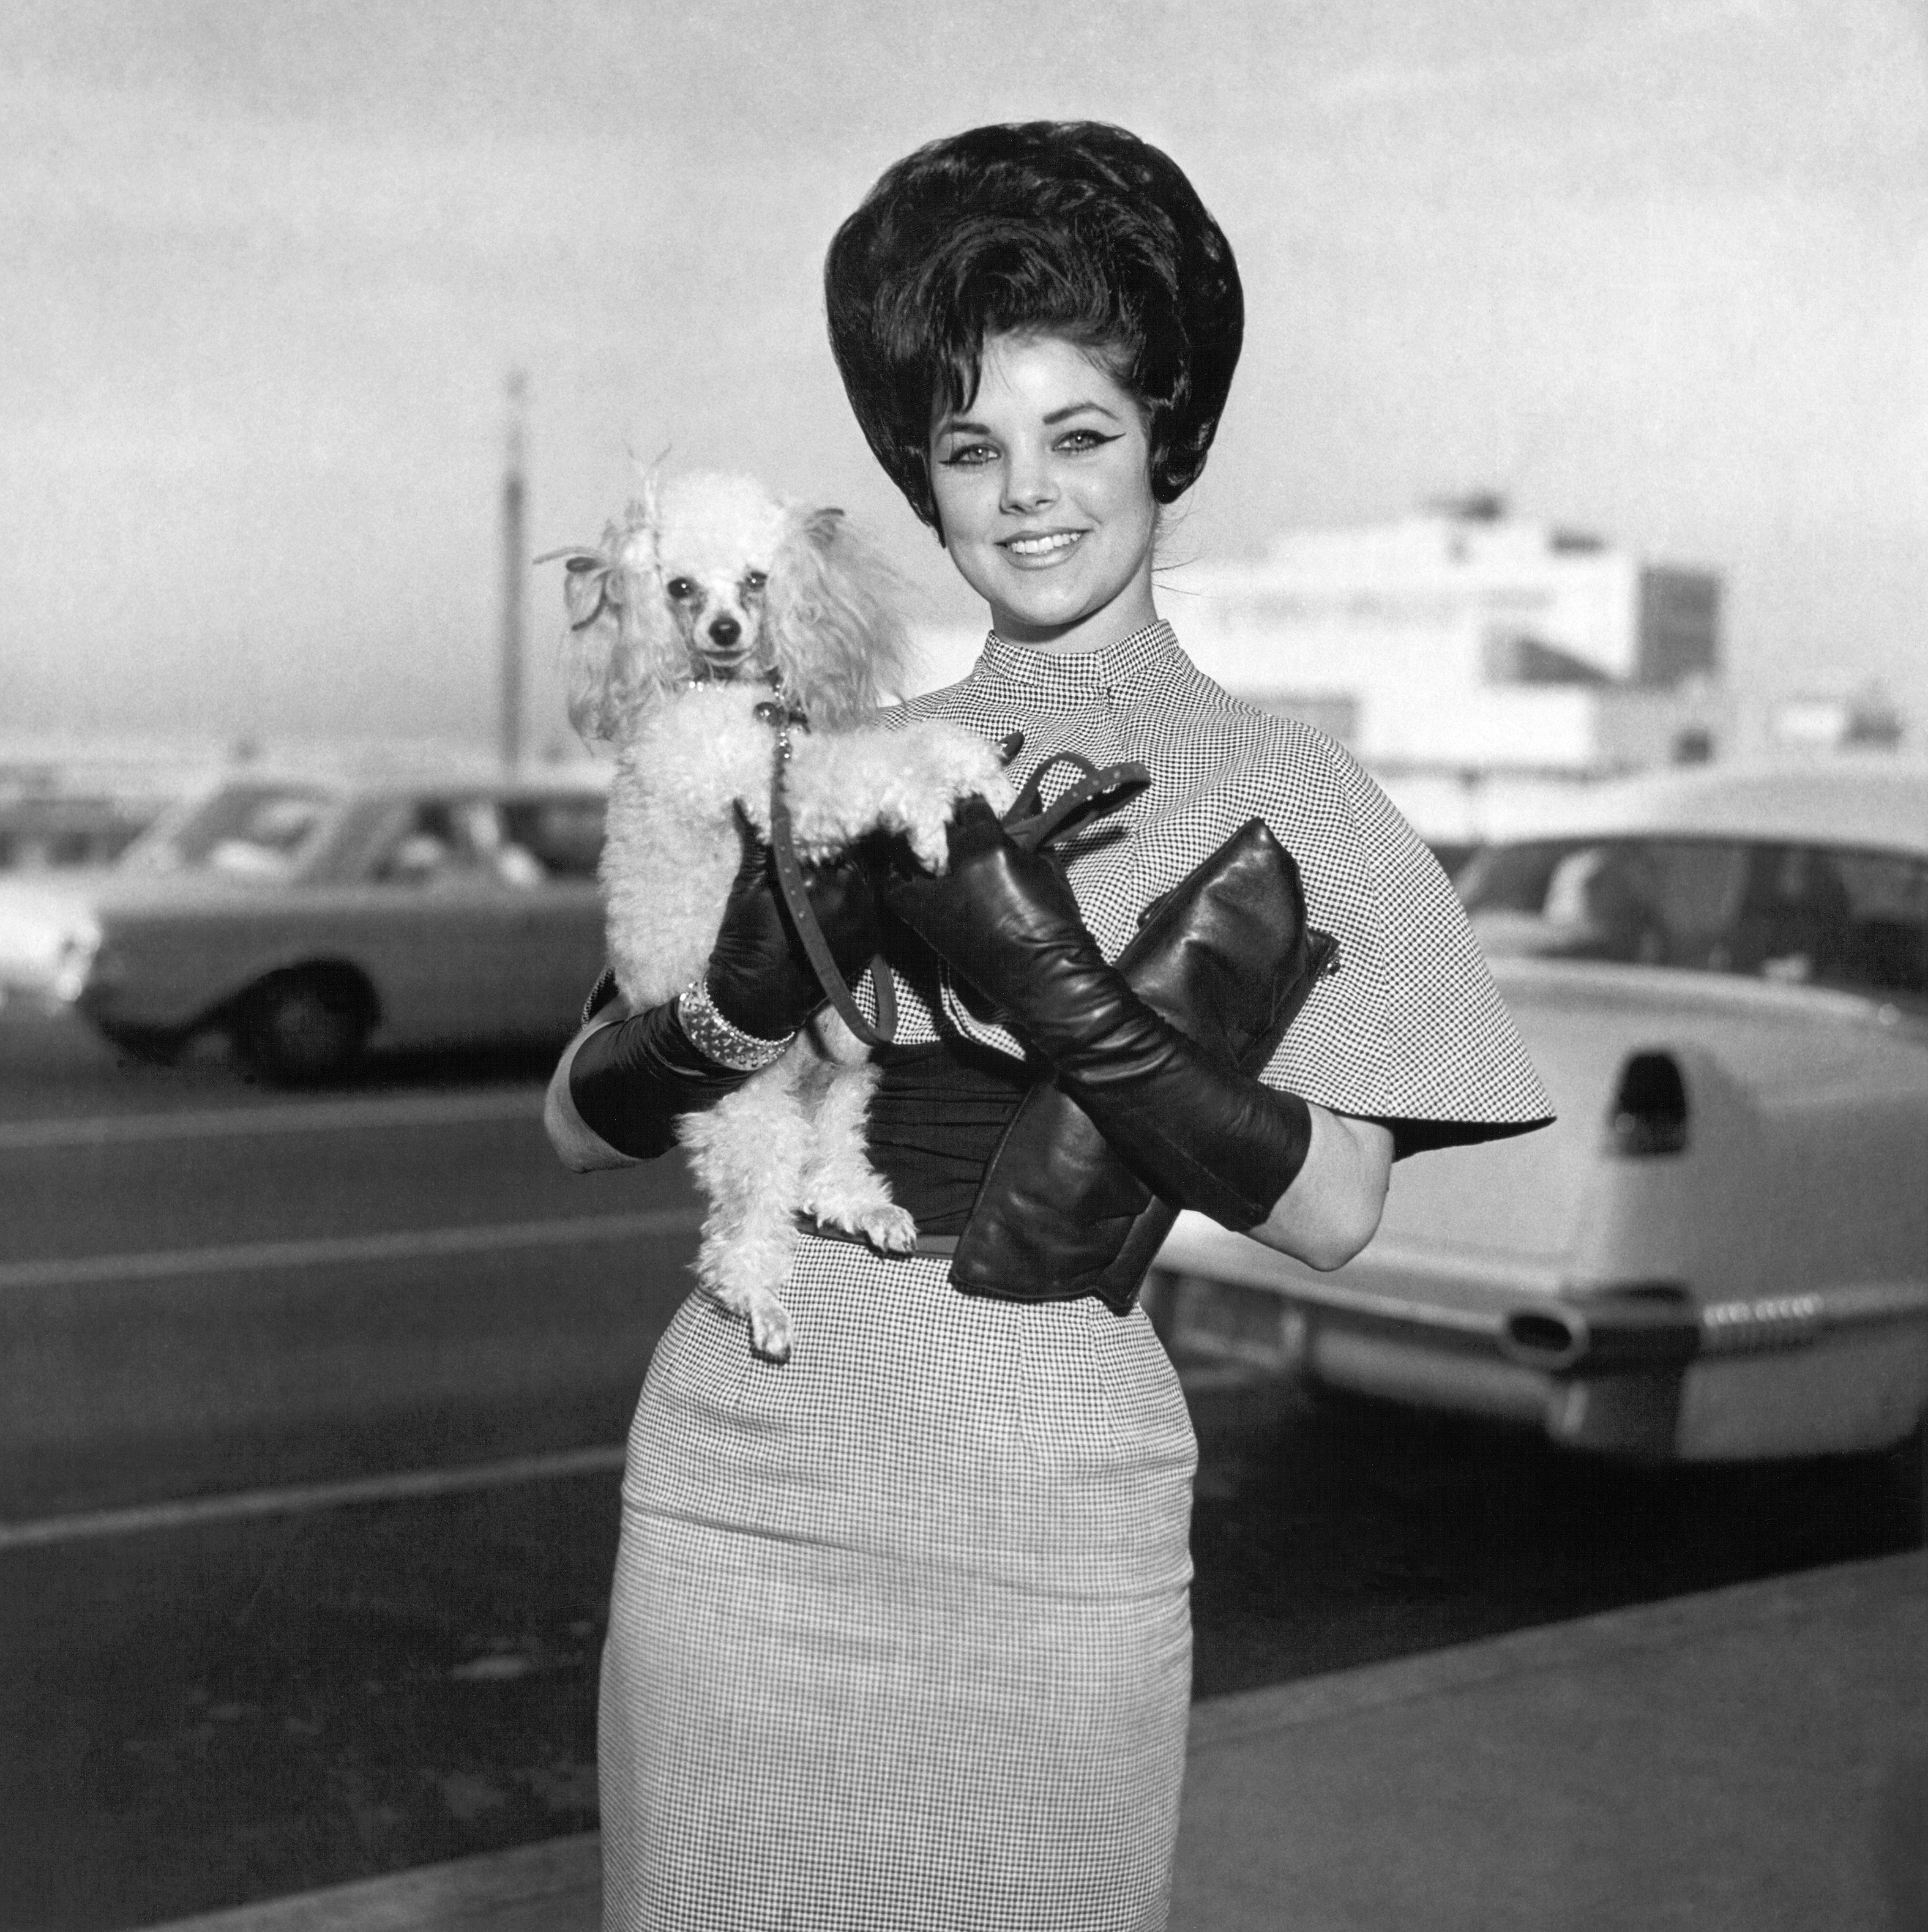 Priscilla Presley at Memphis International airport on January 11, 1963, in Memphis, Tennessee. | Source: Getty Images